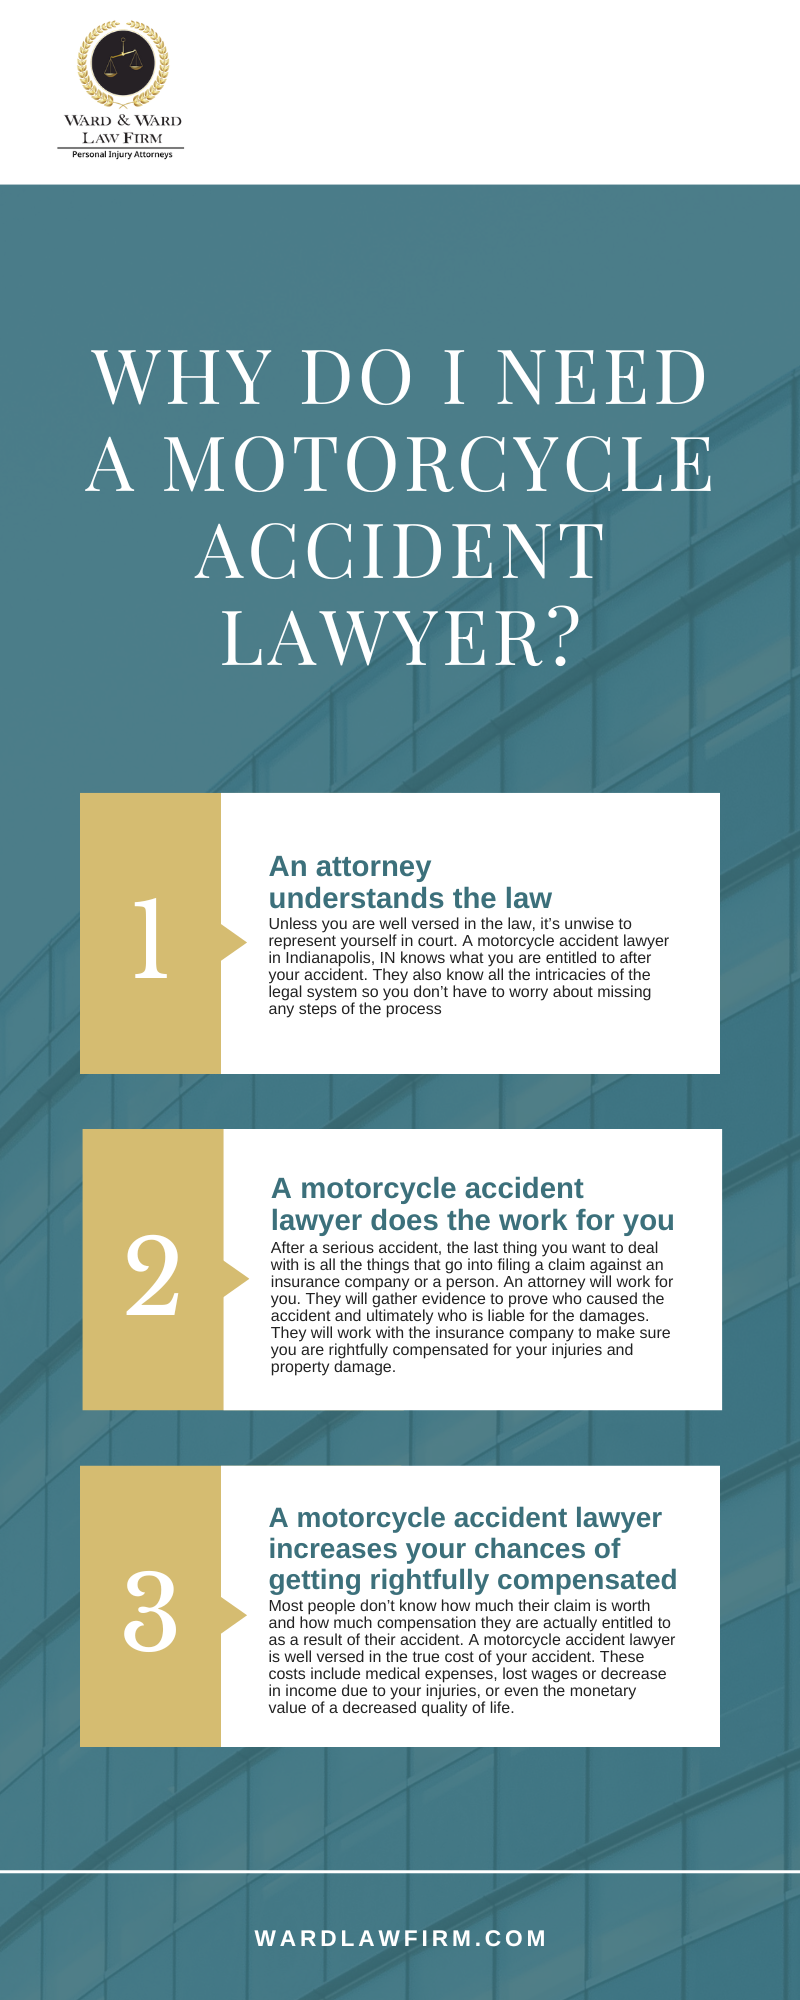 Why Do I Need A Motorcycle Accident Lawyer Infographic